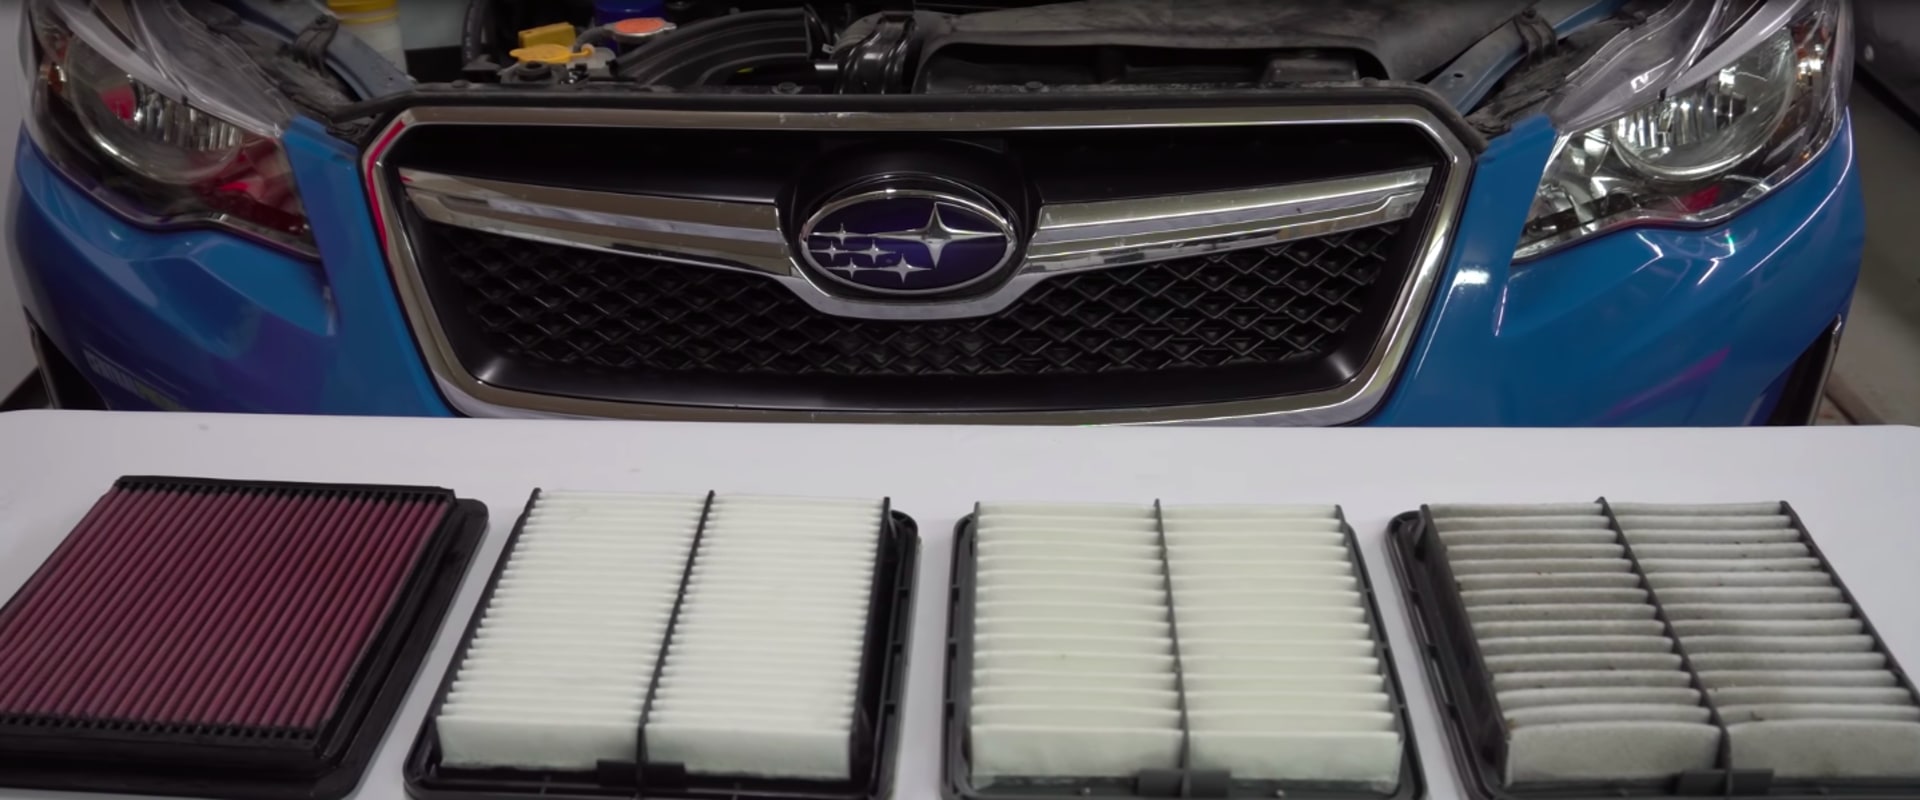 Does Replacing Your Car's Air Filter Increase MPG? - An Expert's Perspective